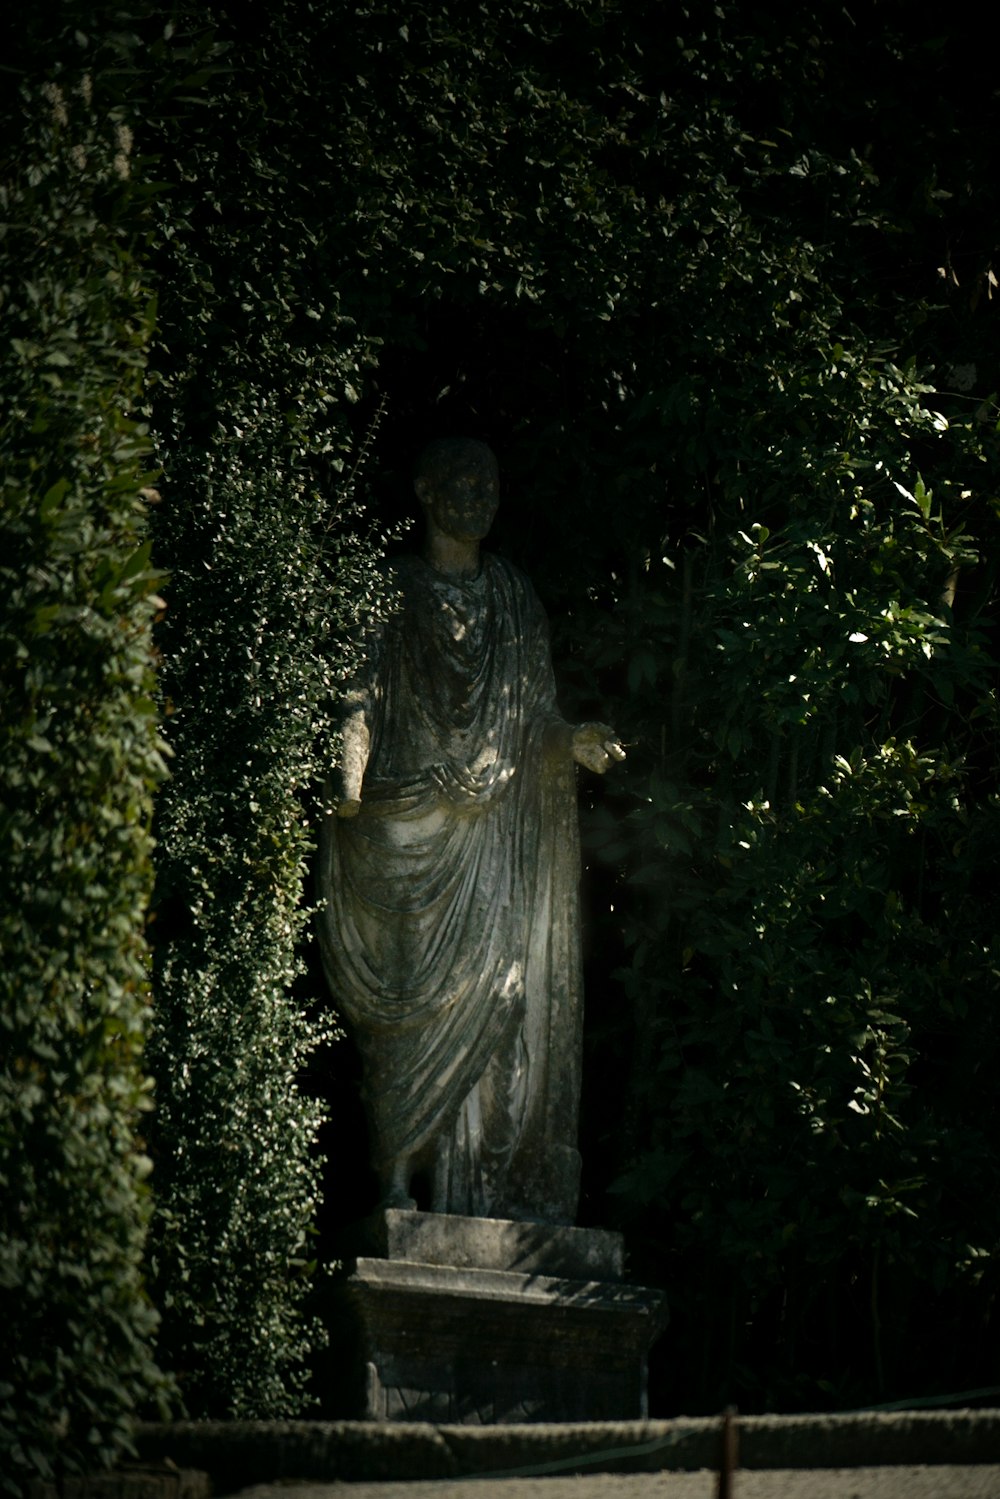 a statue of a woman surrounded by greenery